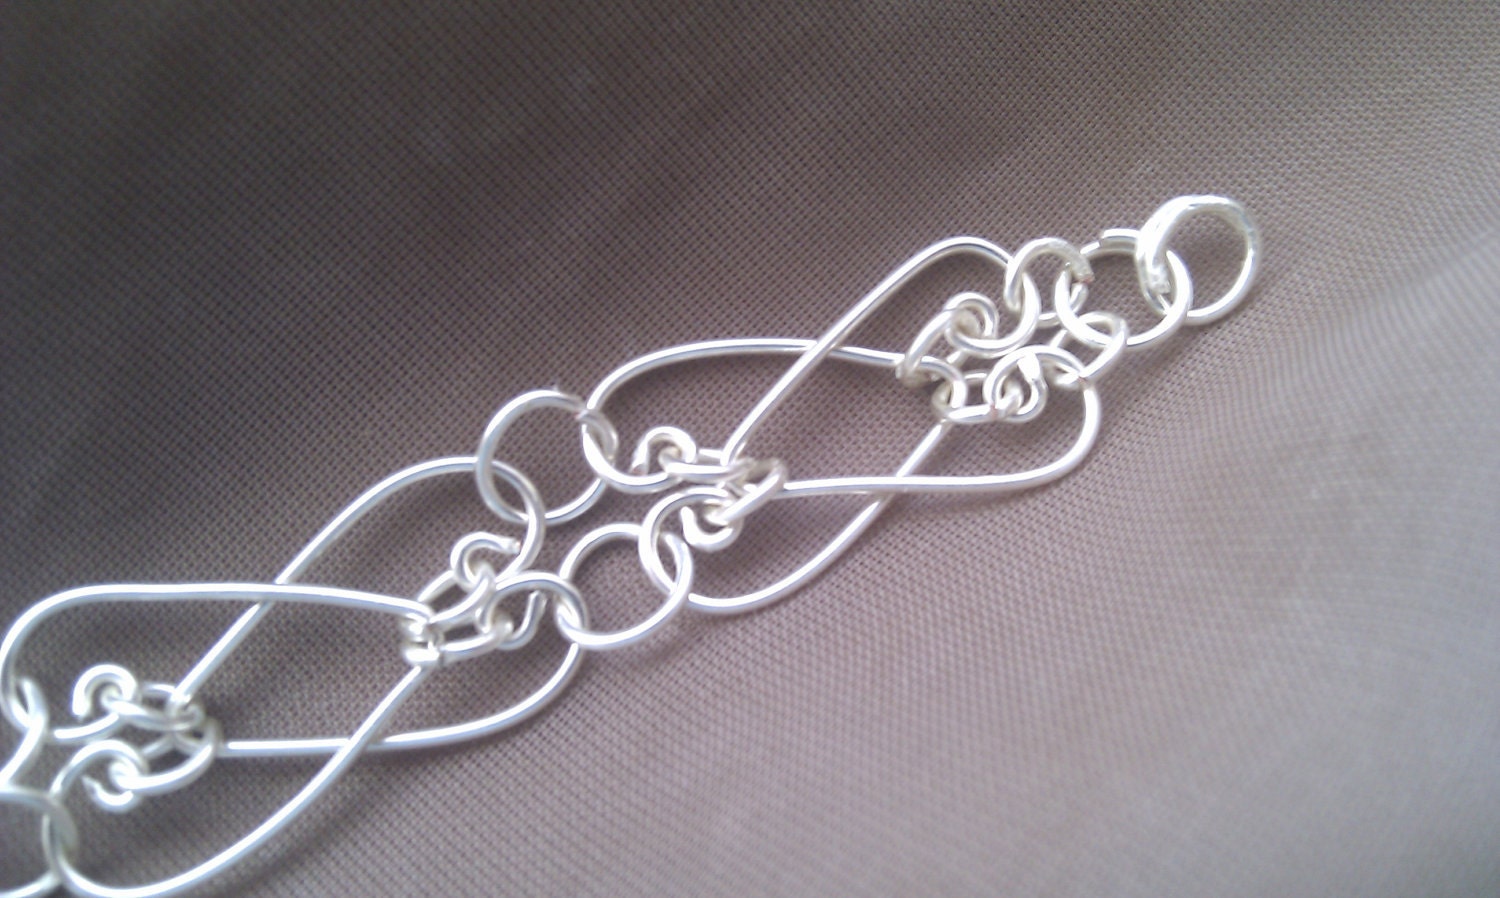 Silver plated, Love Heart Bracelet, Silver plated copper, "Heart to Heart"